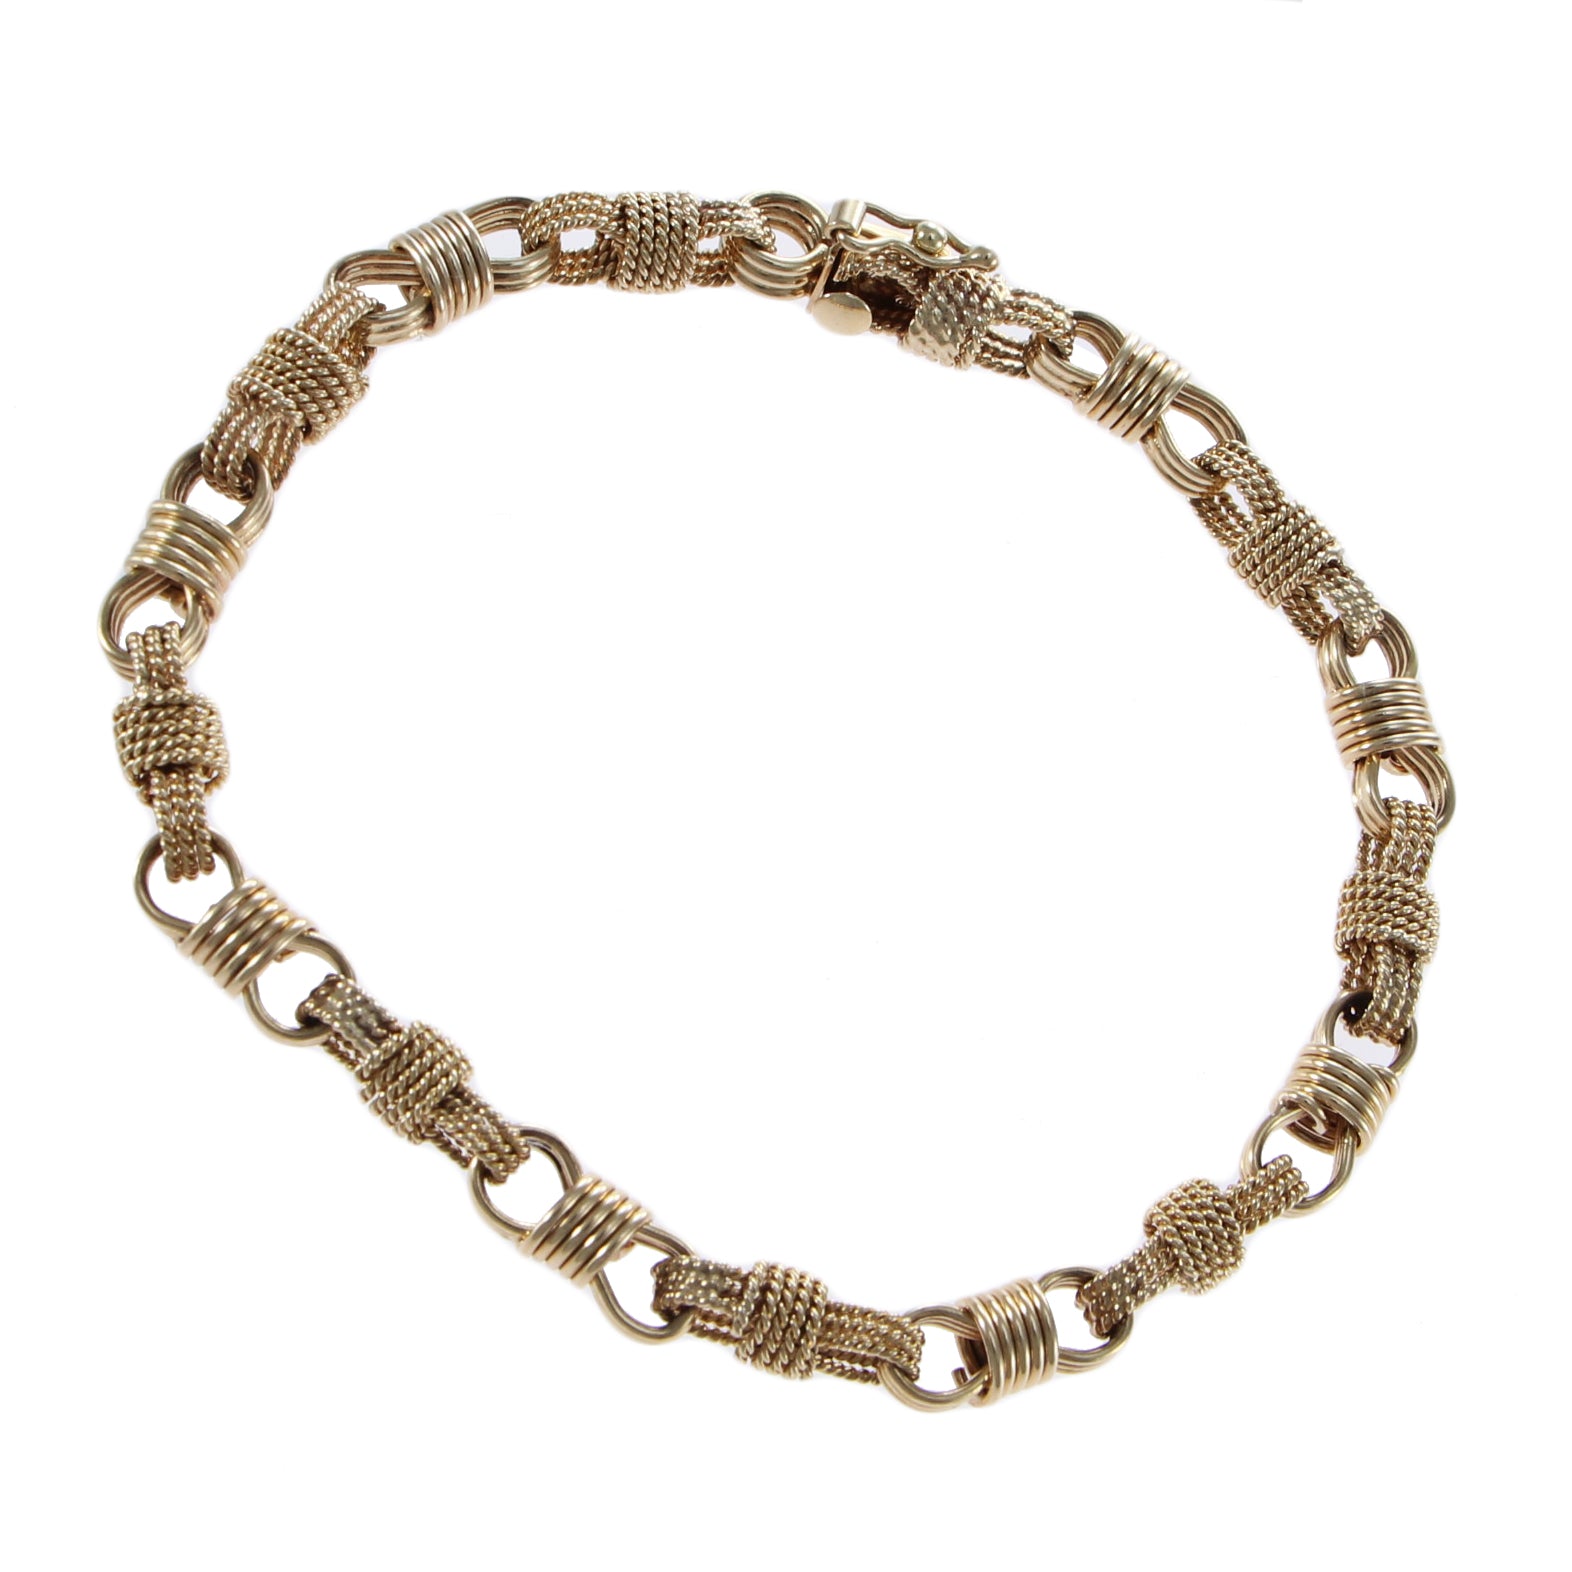 Women's Rope Chain Bracelet in 9ct Yellow Gold